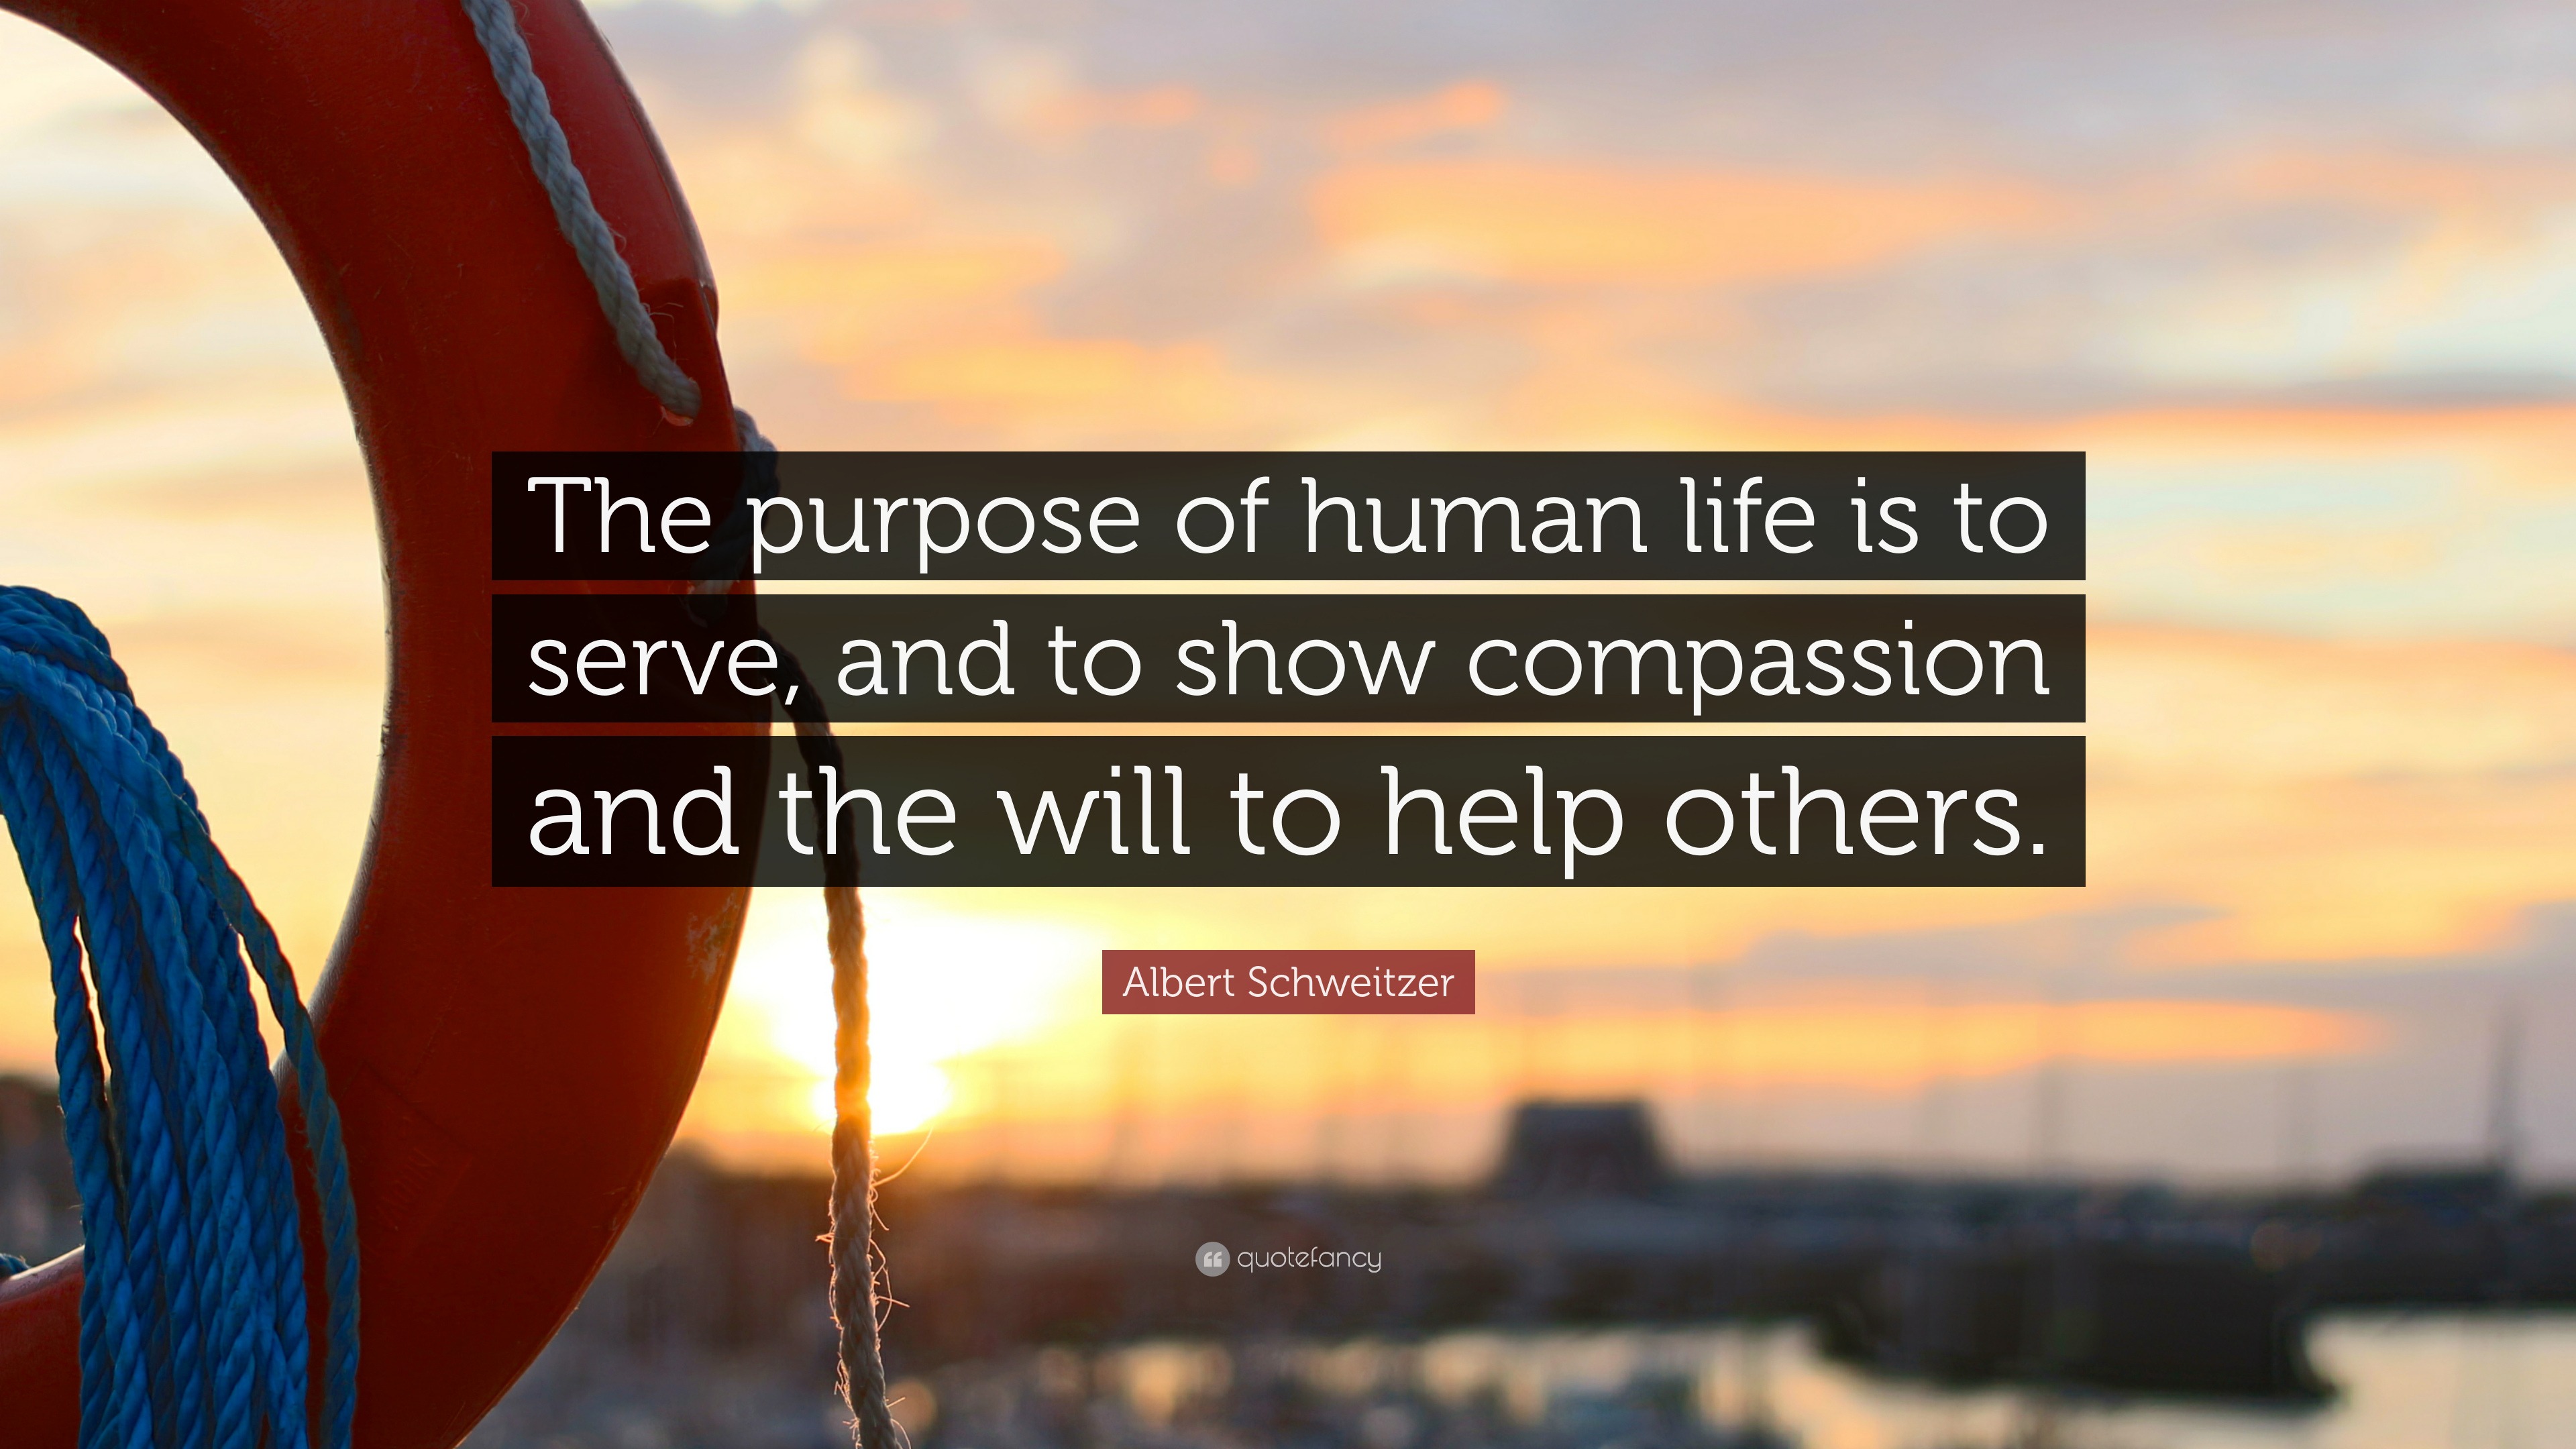 Albert Schweitzer Quote: “The purpose of human life is to serve, and to